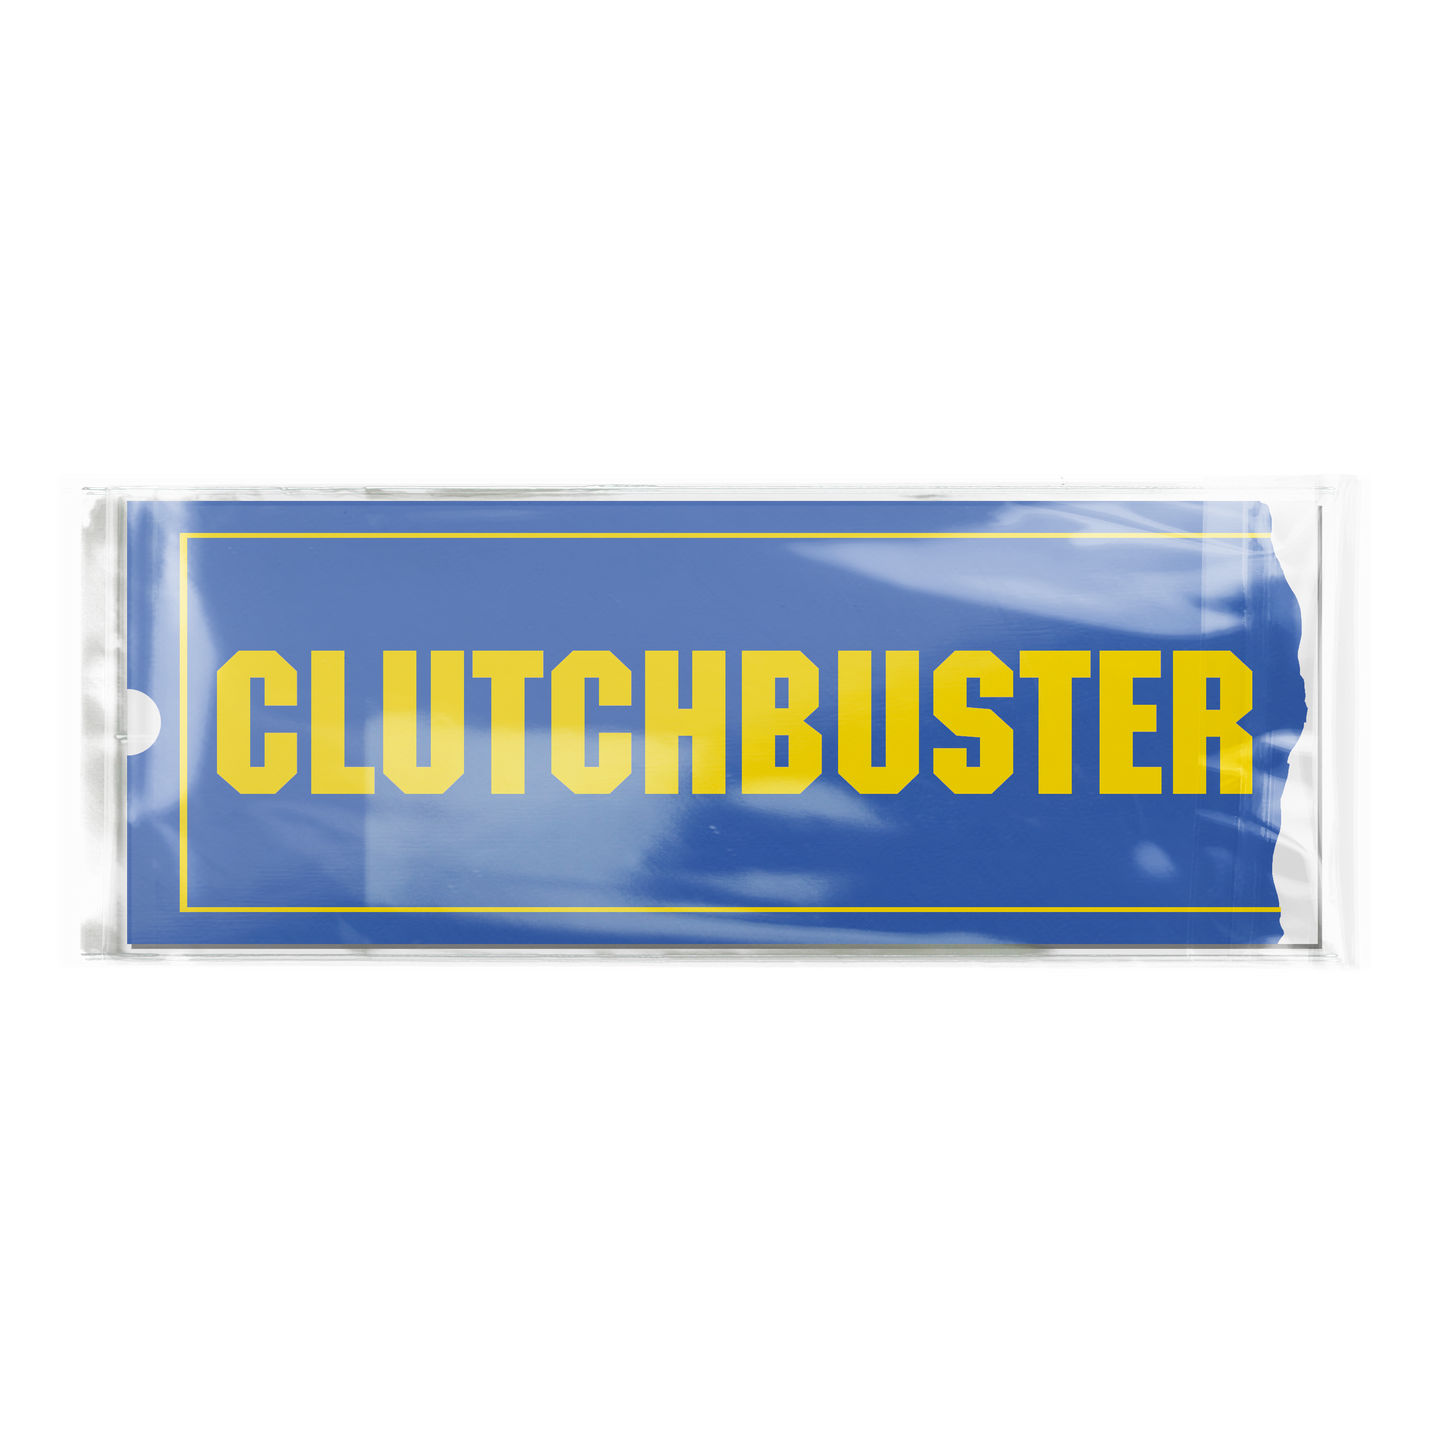 Clutchbuster